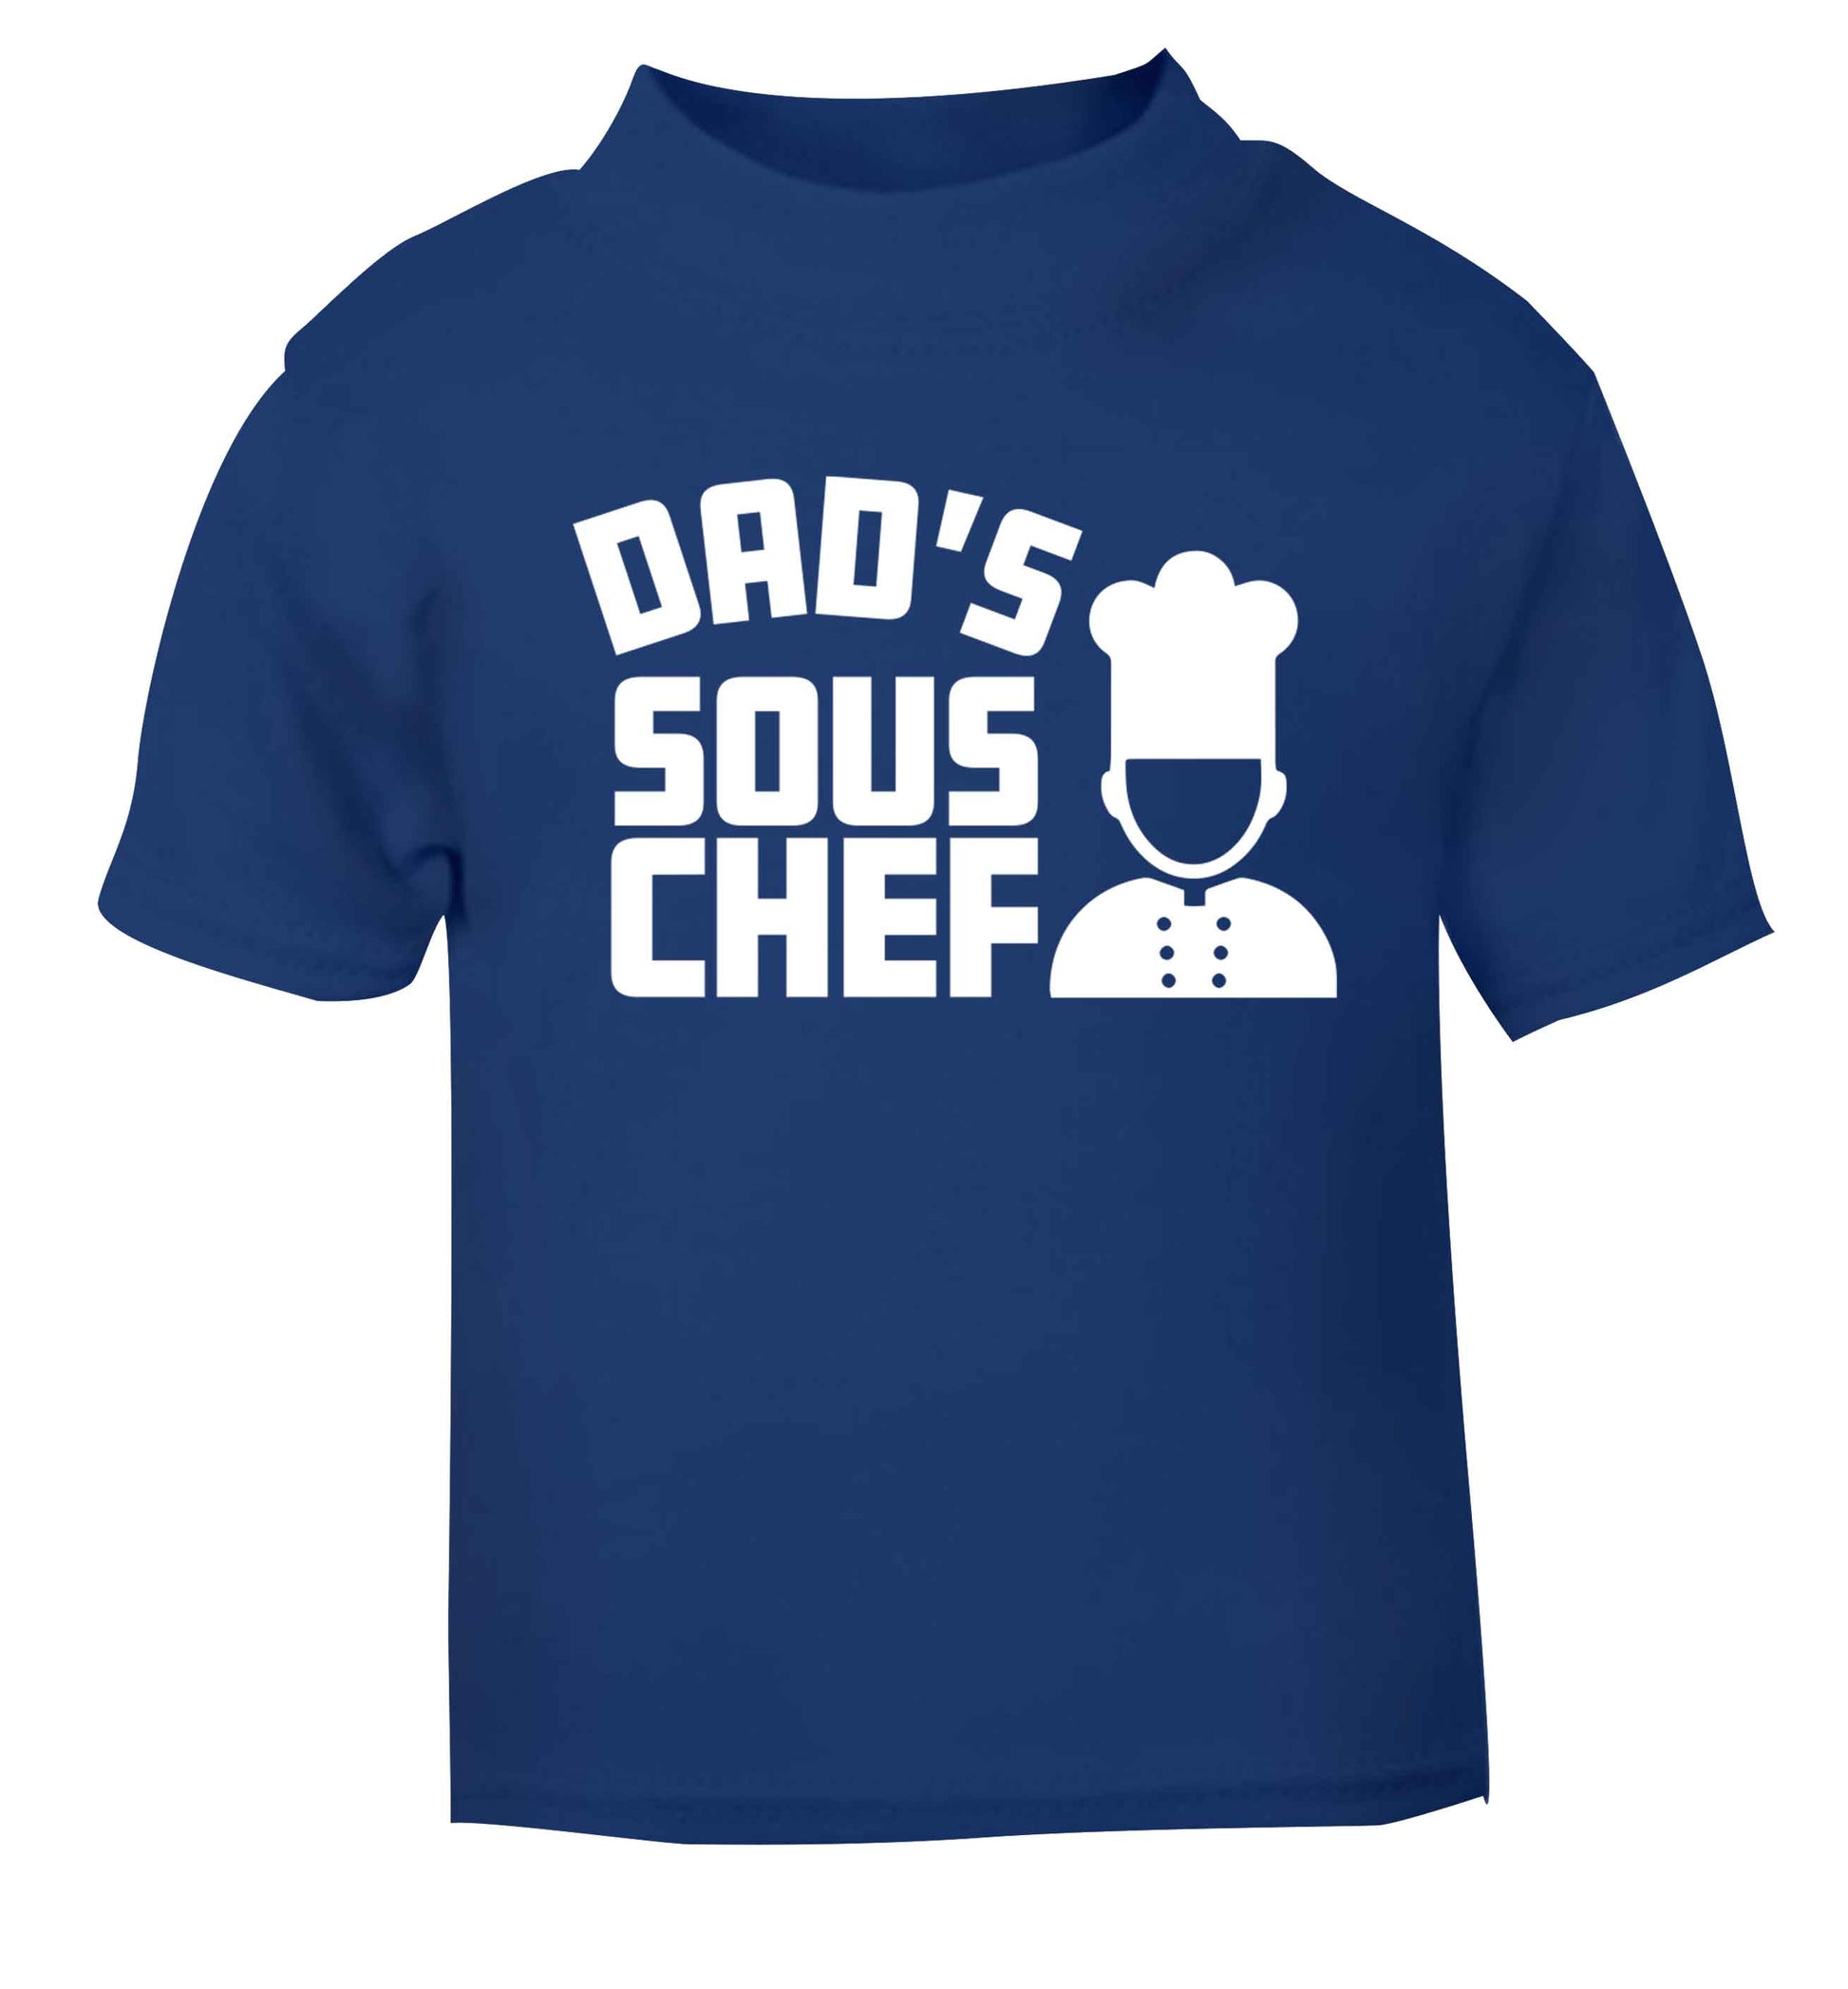 Dad's sous chef blue baby toddler Tshirt 2 Years